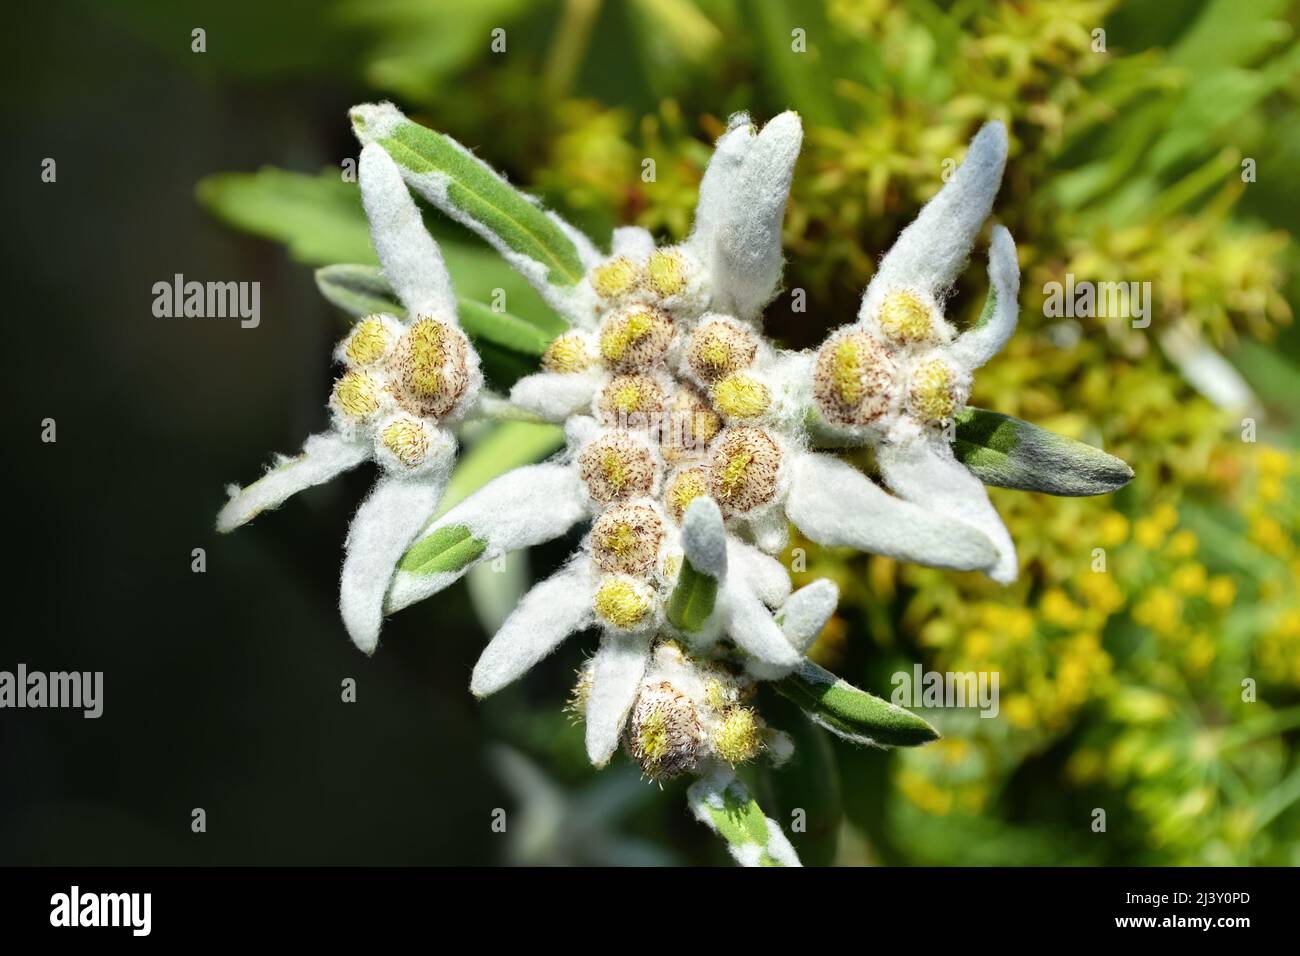 Alpine Edelweiss growing in the garden, a protected white mountain flower. Selective focus Stock Photo